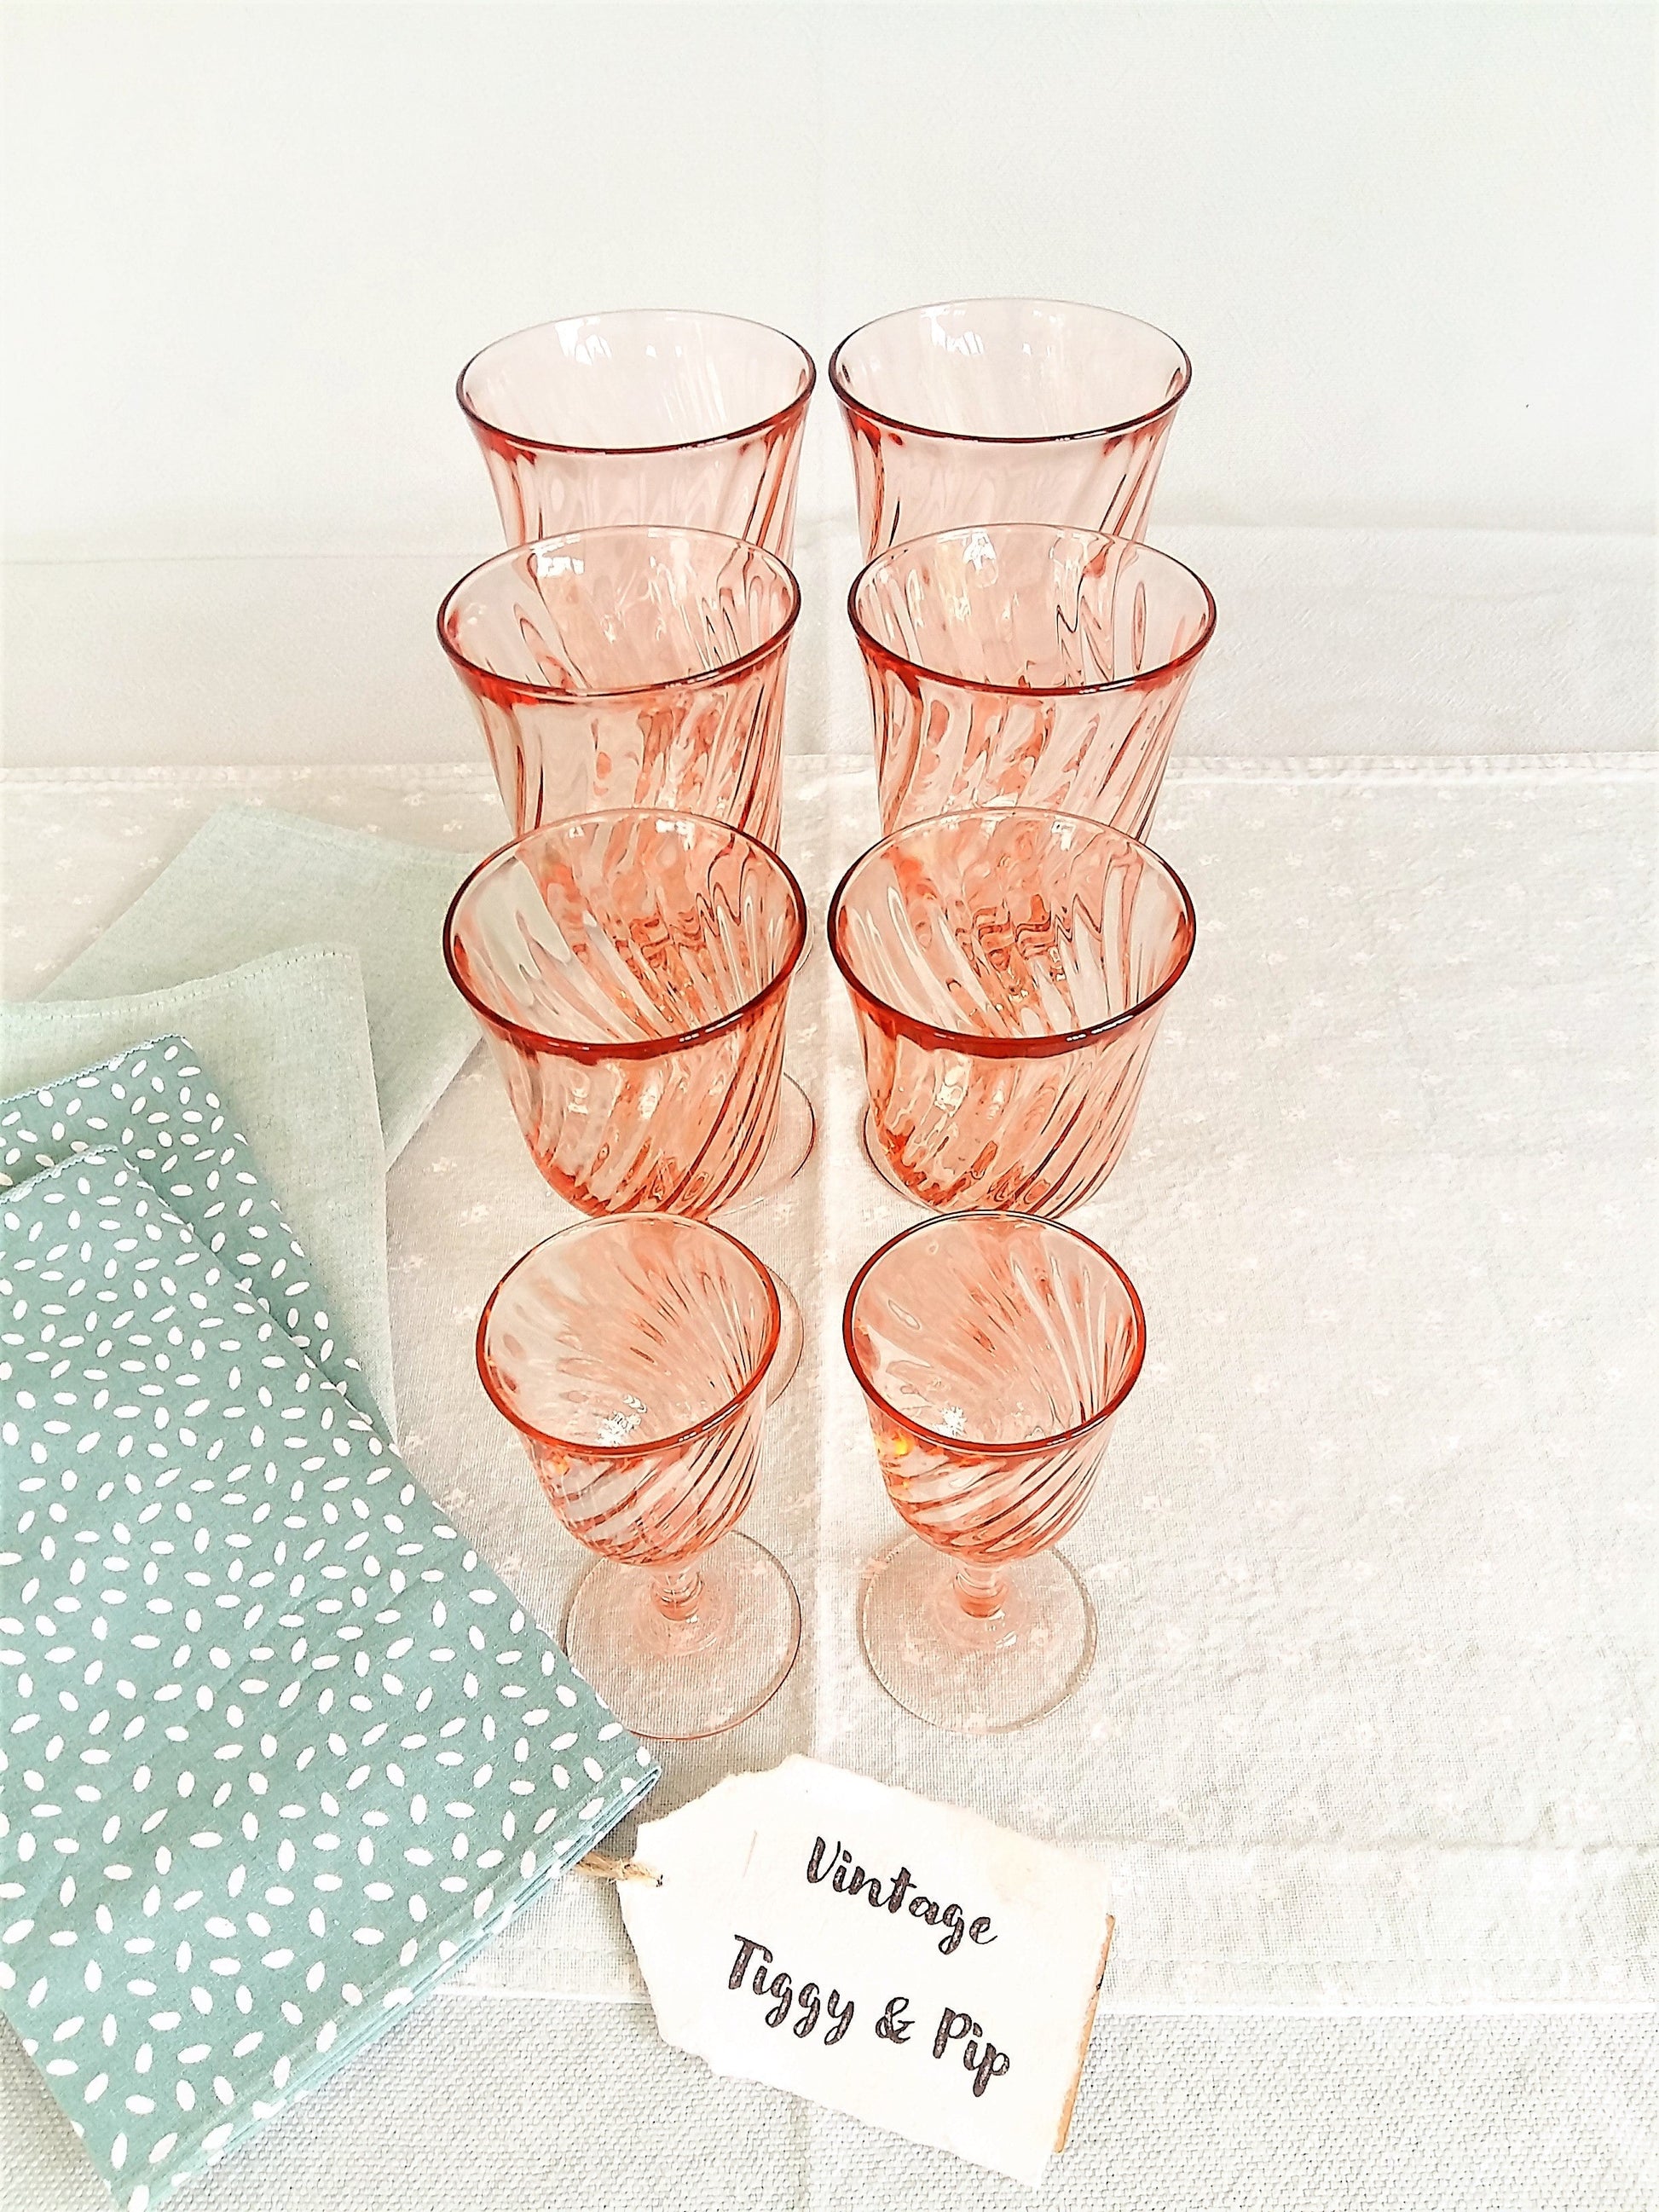 Pink Glassware. EIGHT Vintage Glasses. from Tiggy & Pip - €128.00! Shop now at Tiggy and Pip